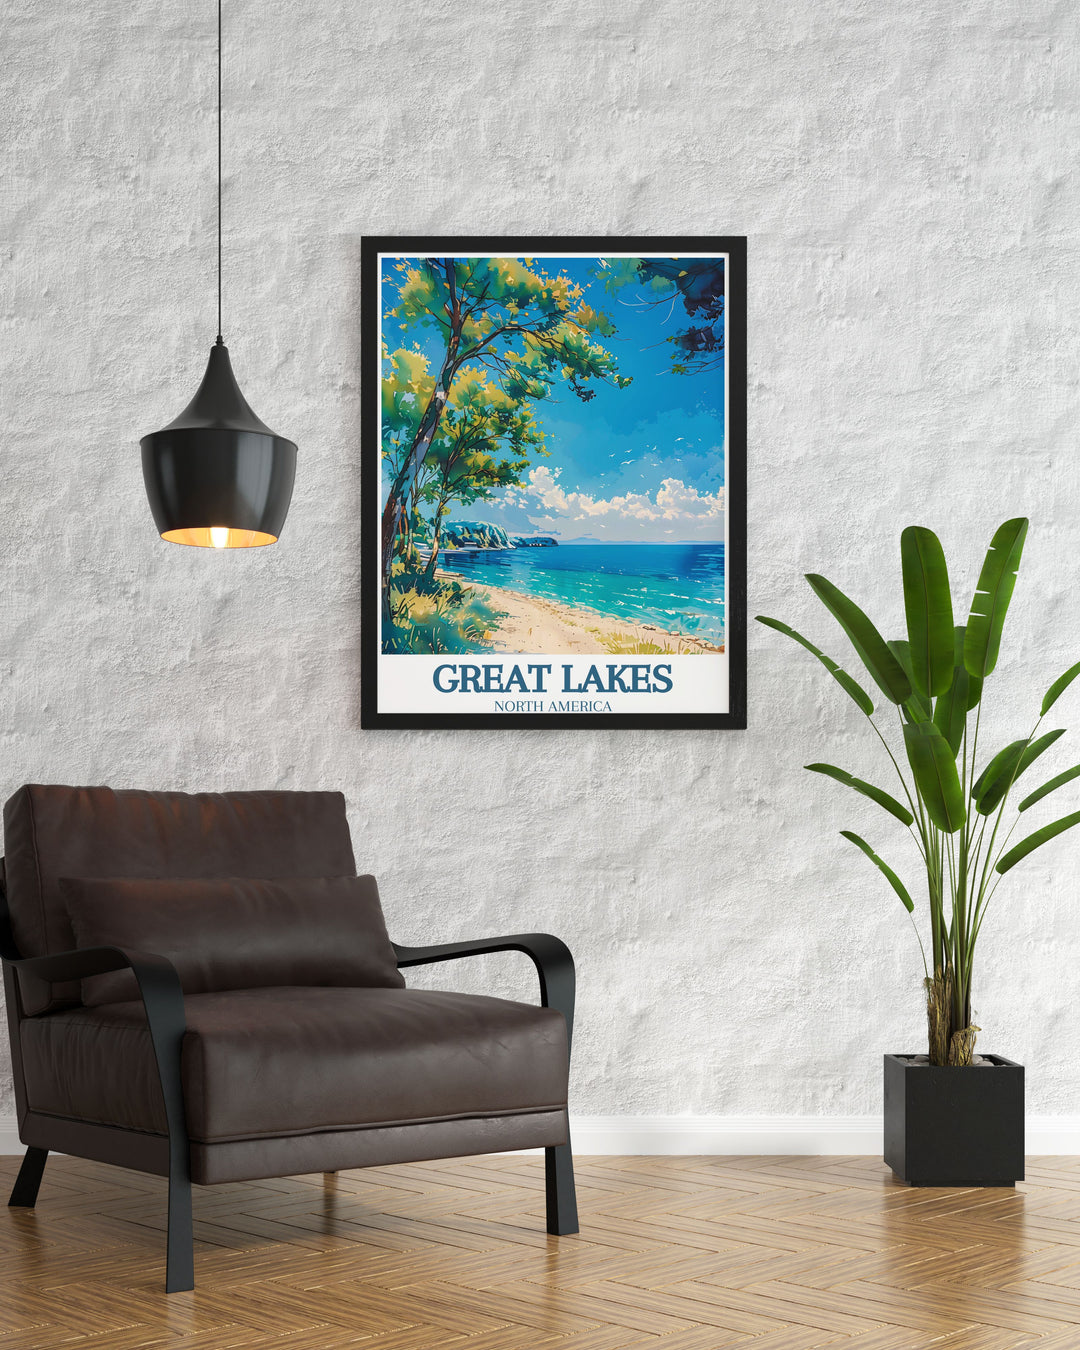 This art print of Lake Erie offers a detailed illustration of its calm waters and surrounding landscapes, bringing the natural beauty of the Great Lakes into your living space.